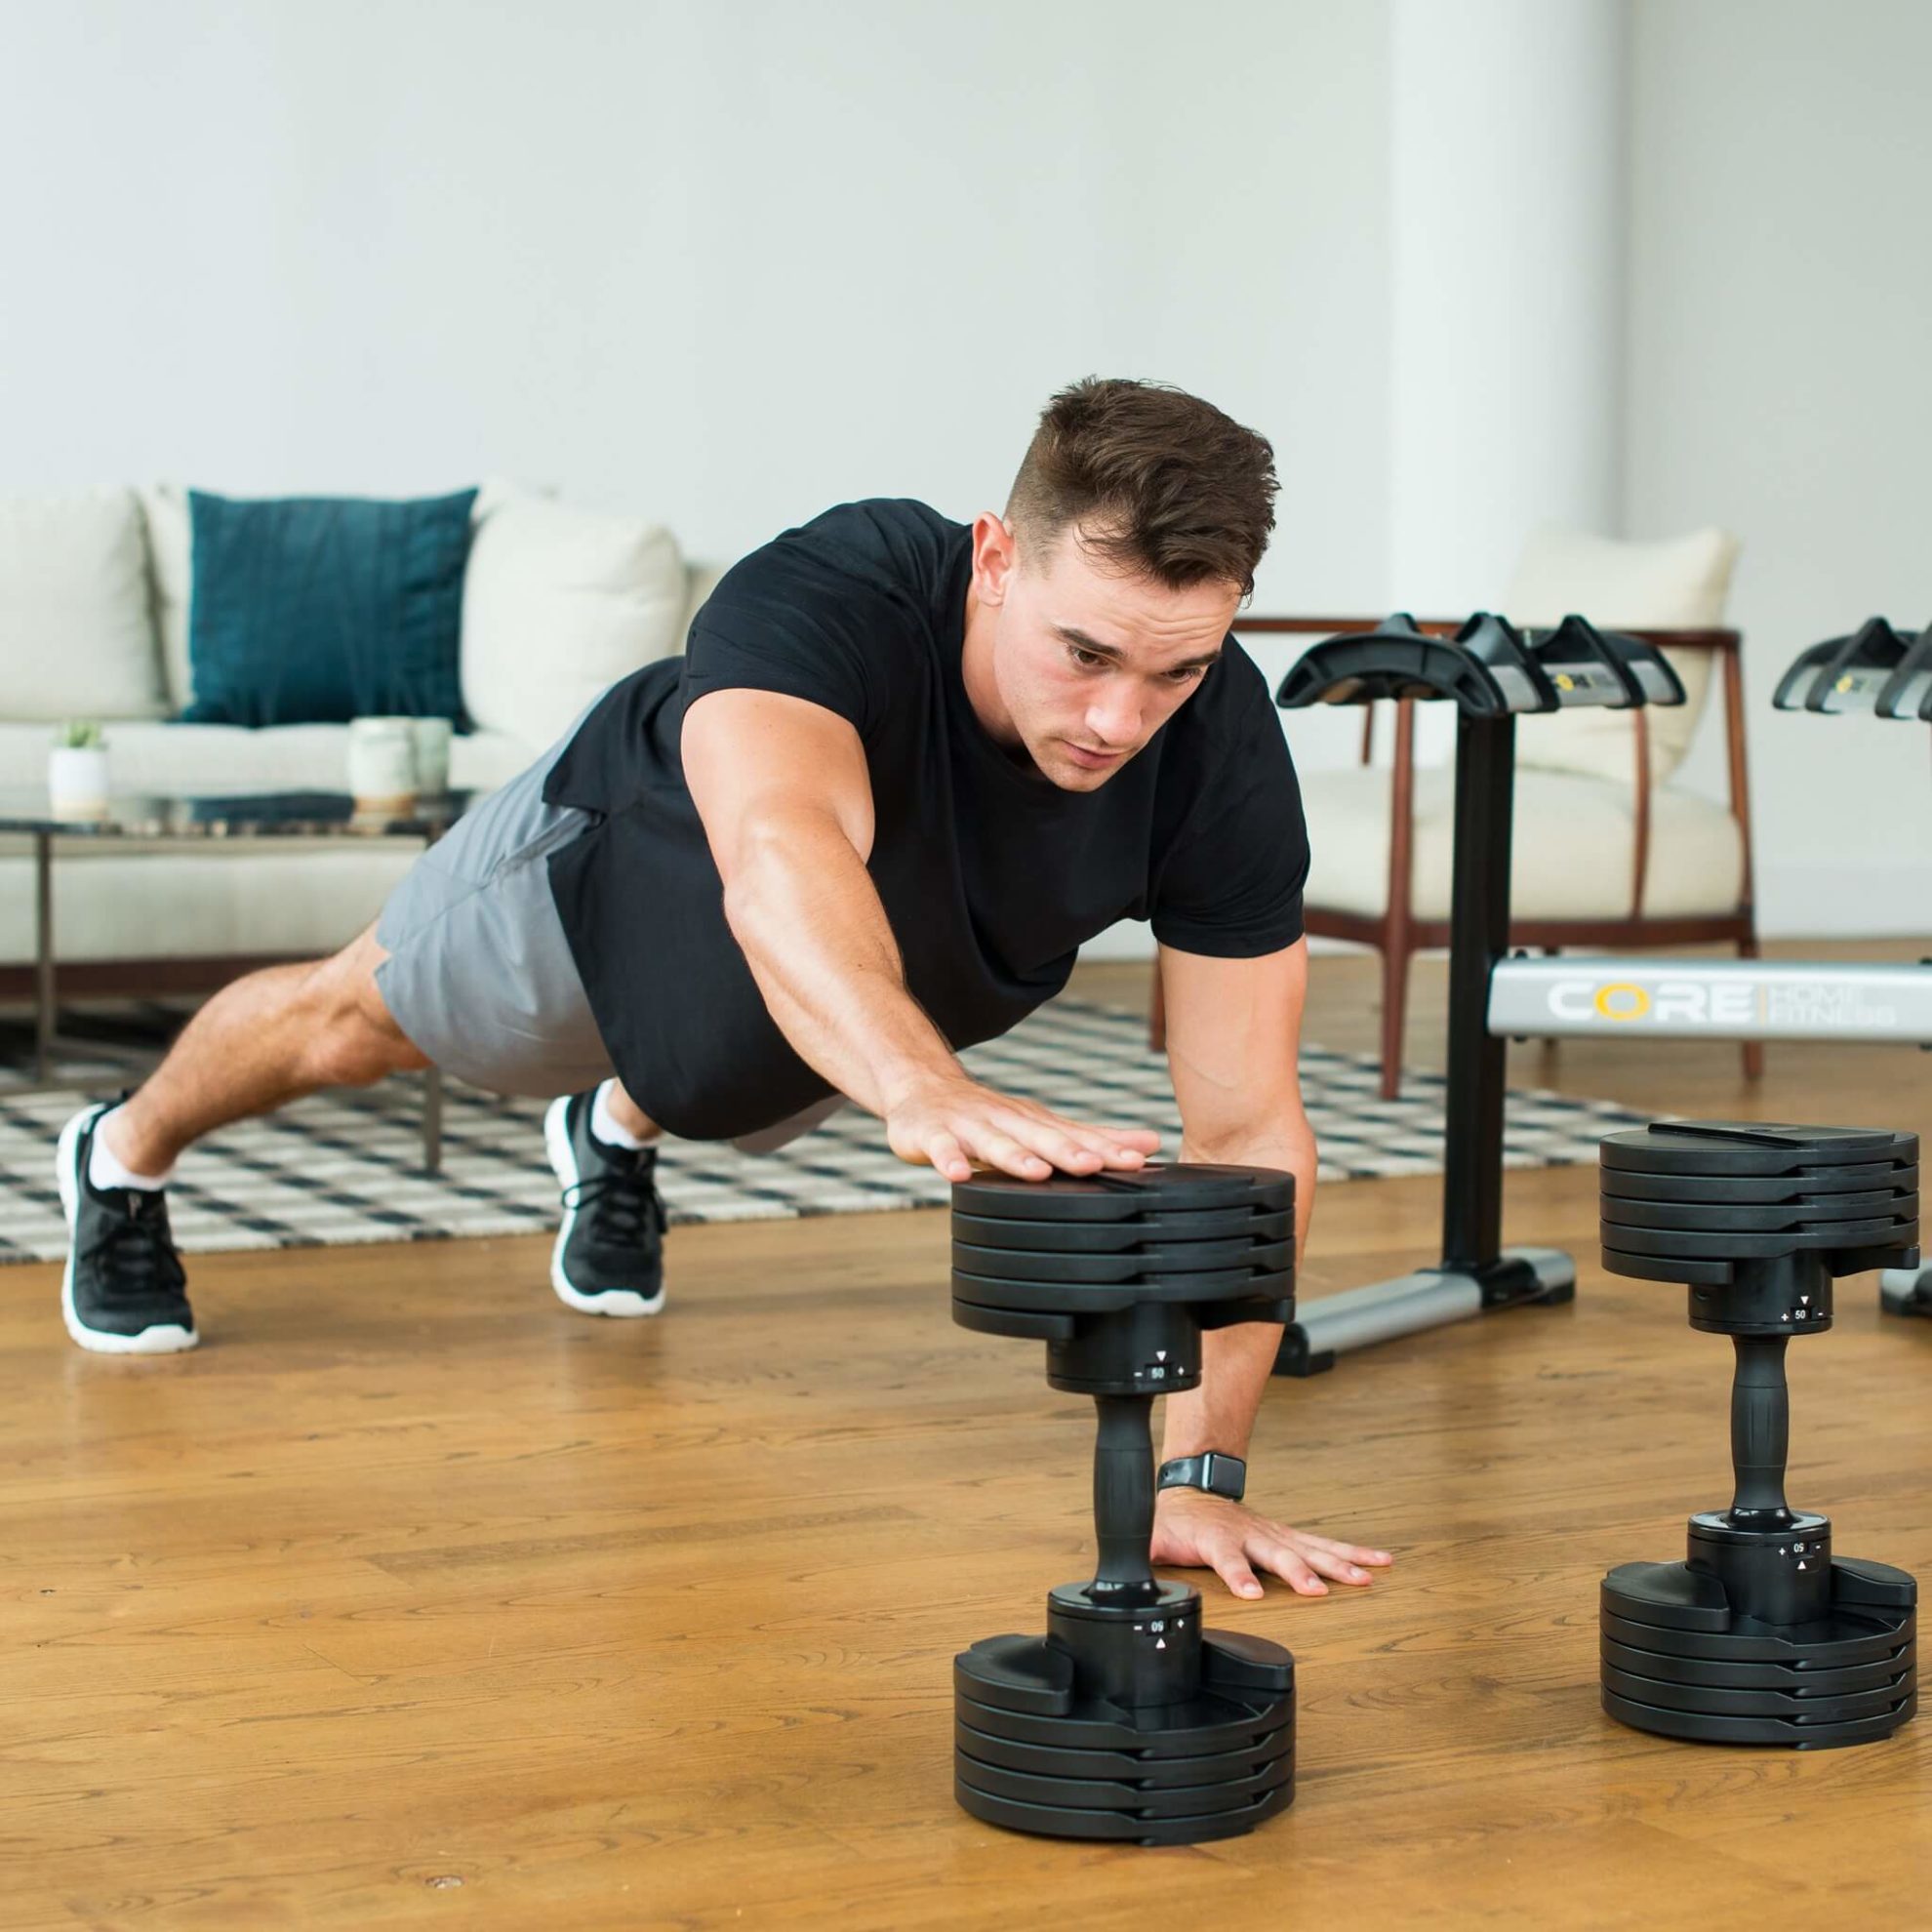 Core Home Fitness Review - Must Read This Before Buying